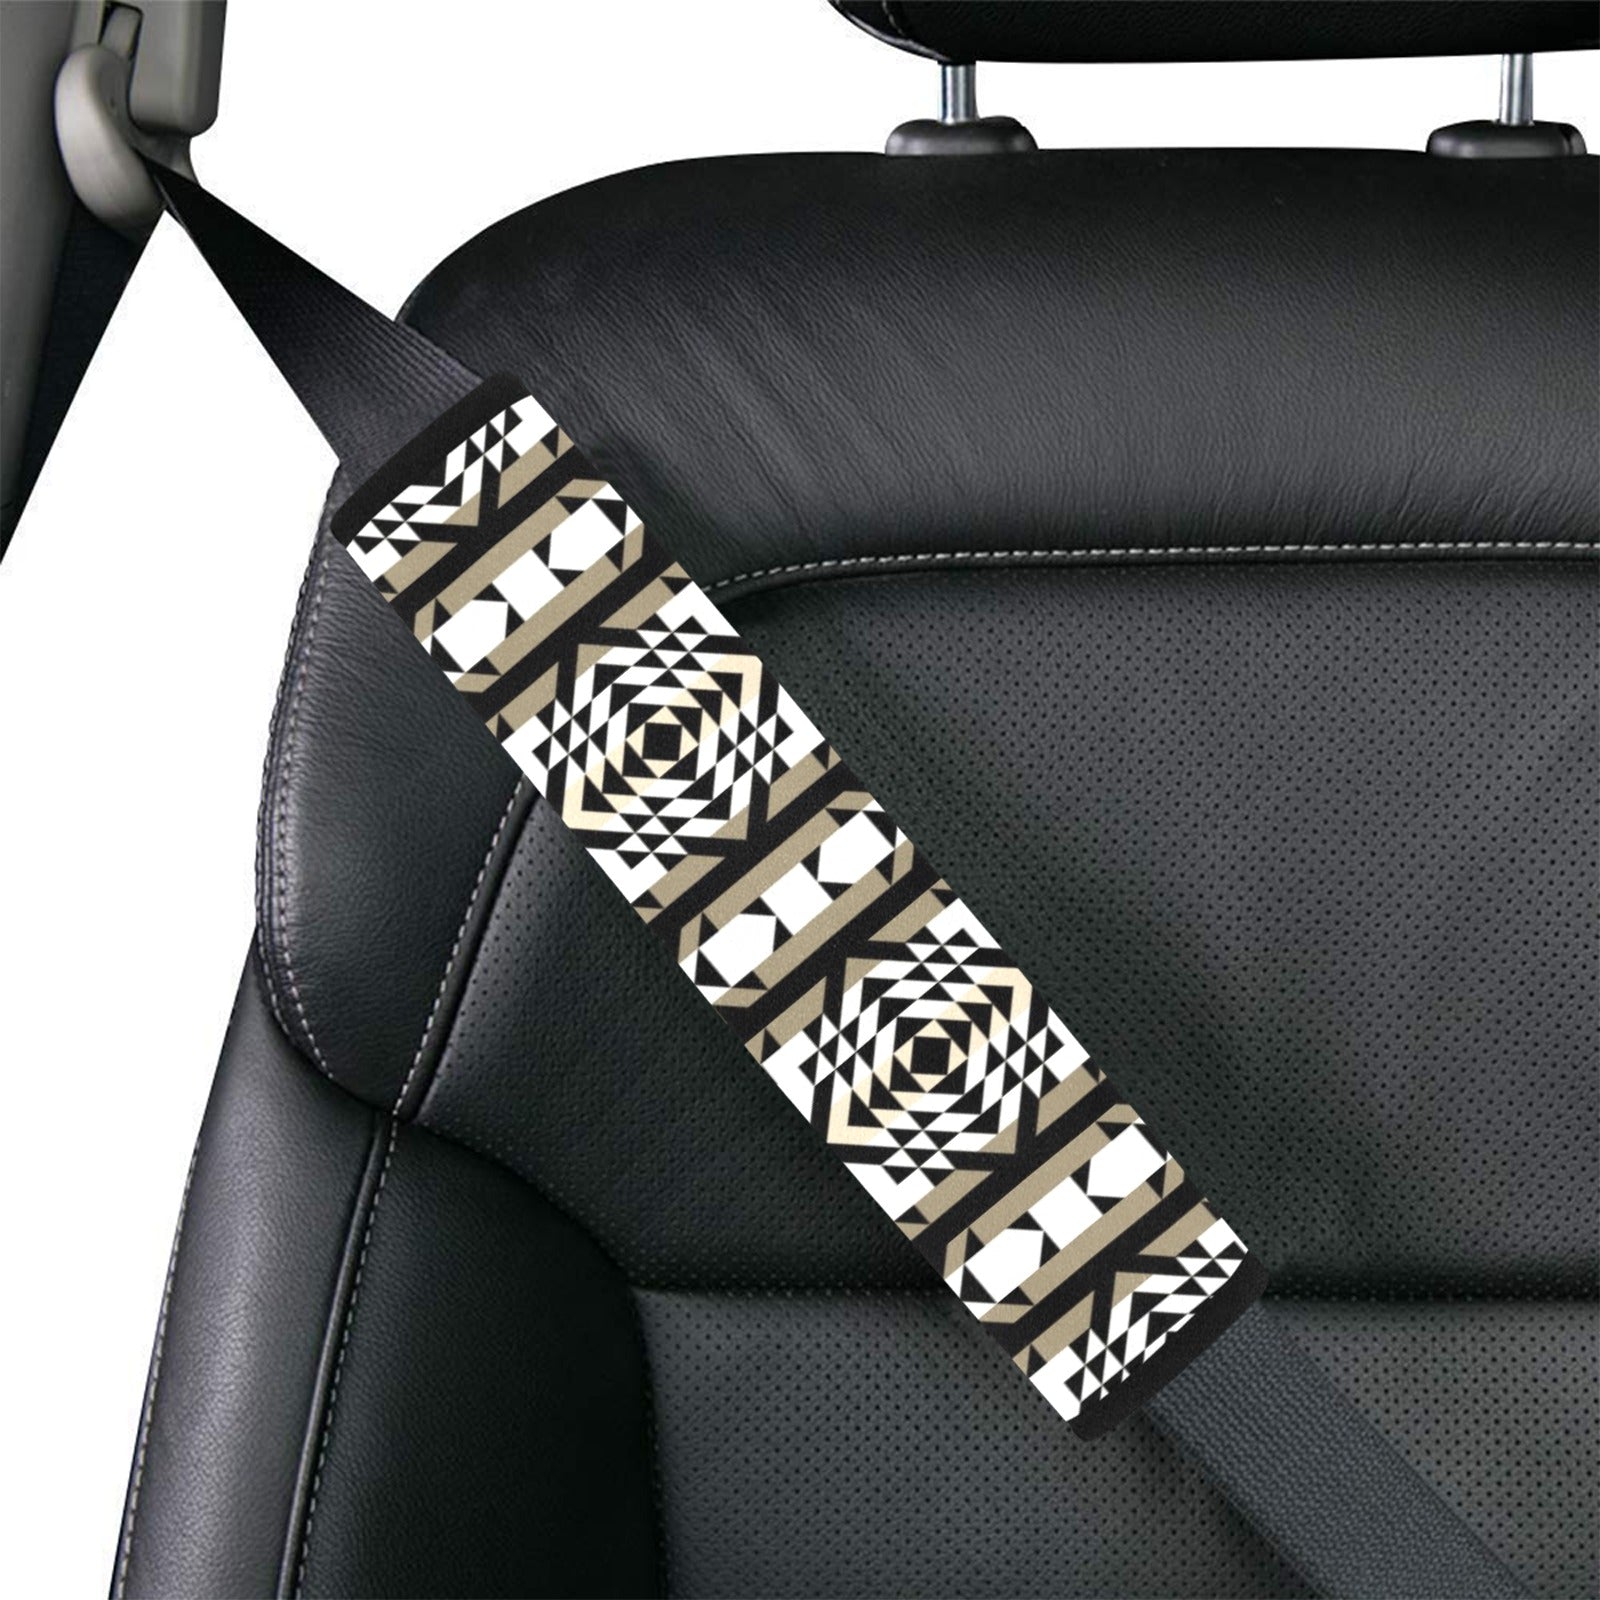 Black Rose Winter Canyon Car Seat Belt Cover 7''x12.6'' (Pack of 2)